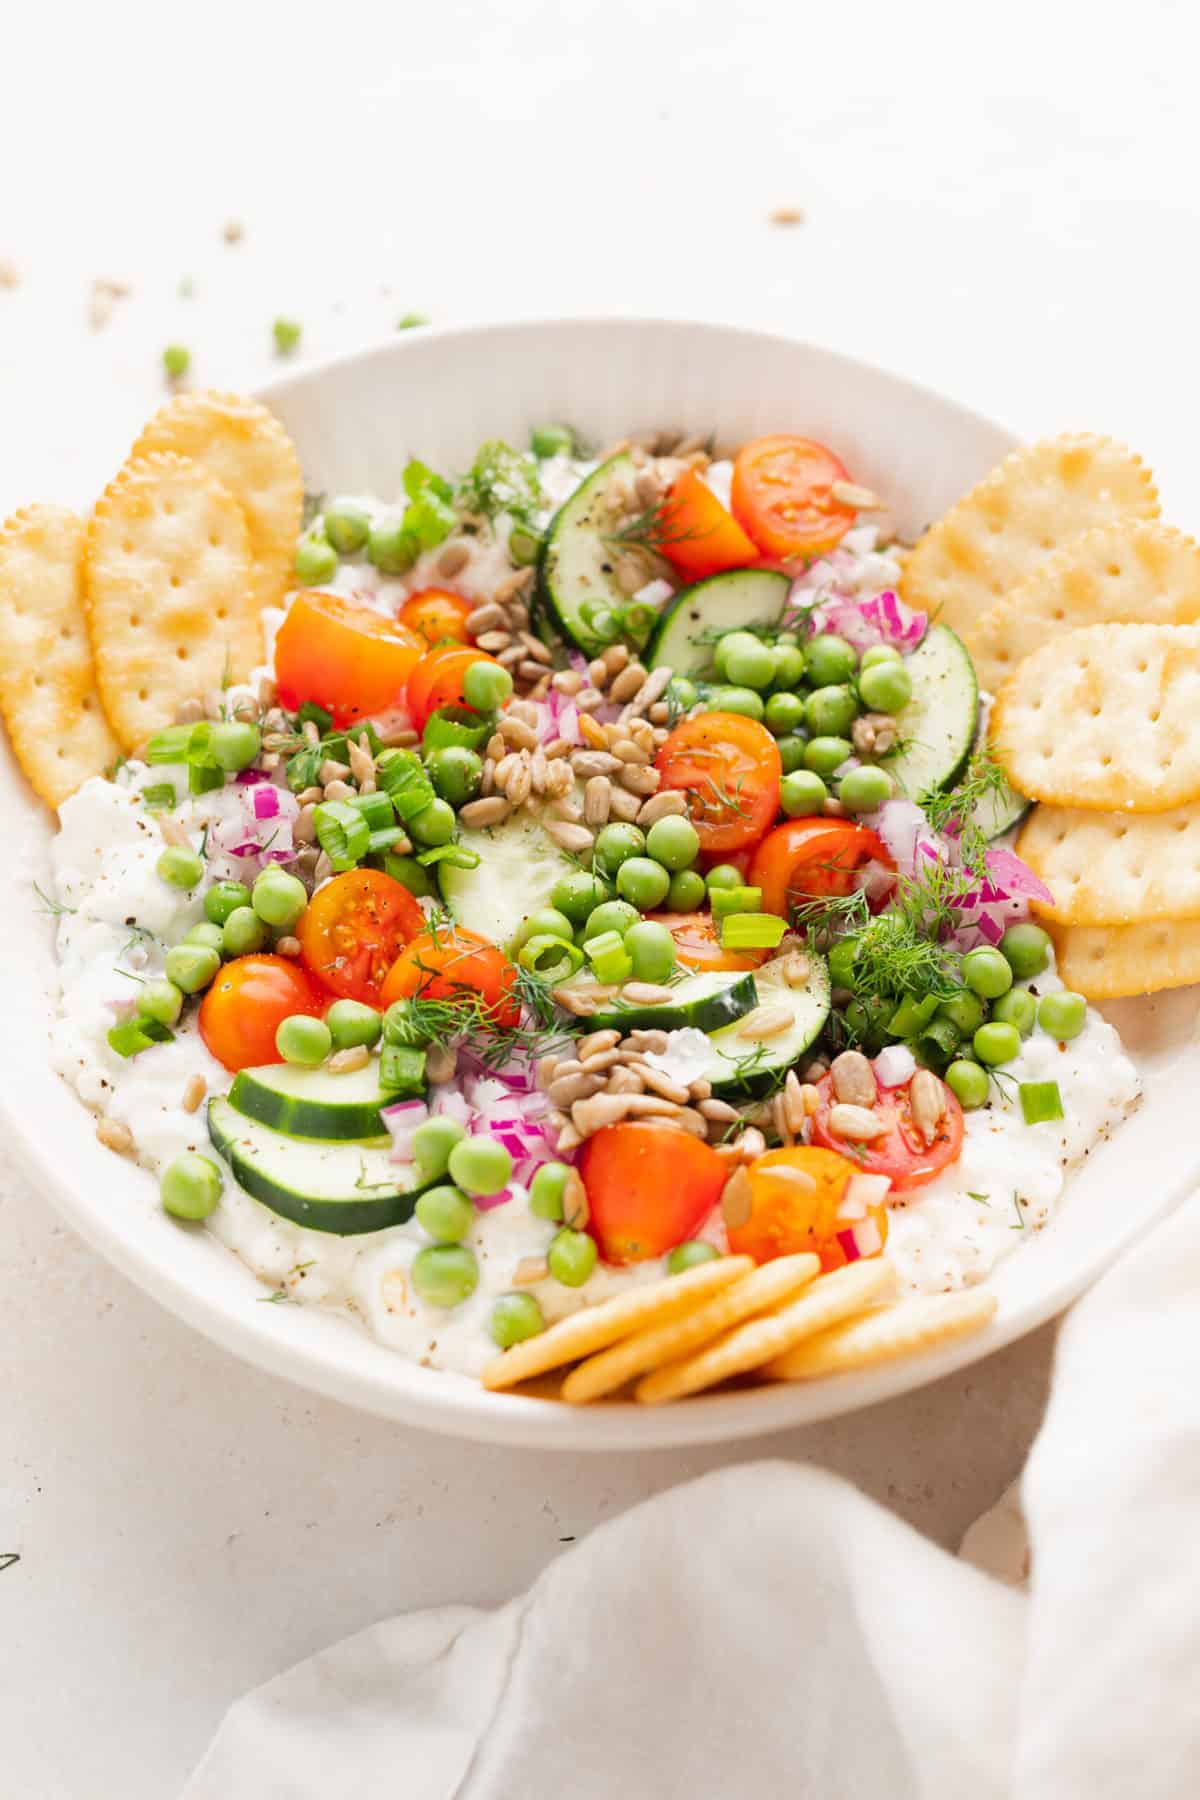 Cottage cheese salad in a bowl with crackers.